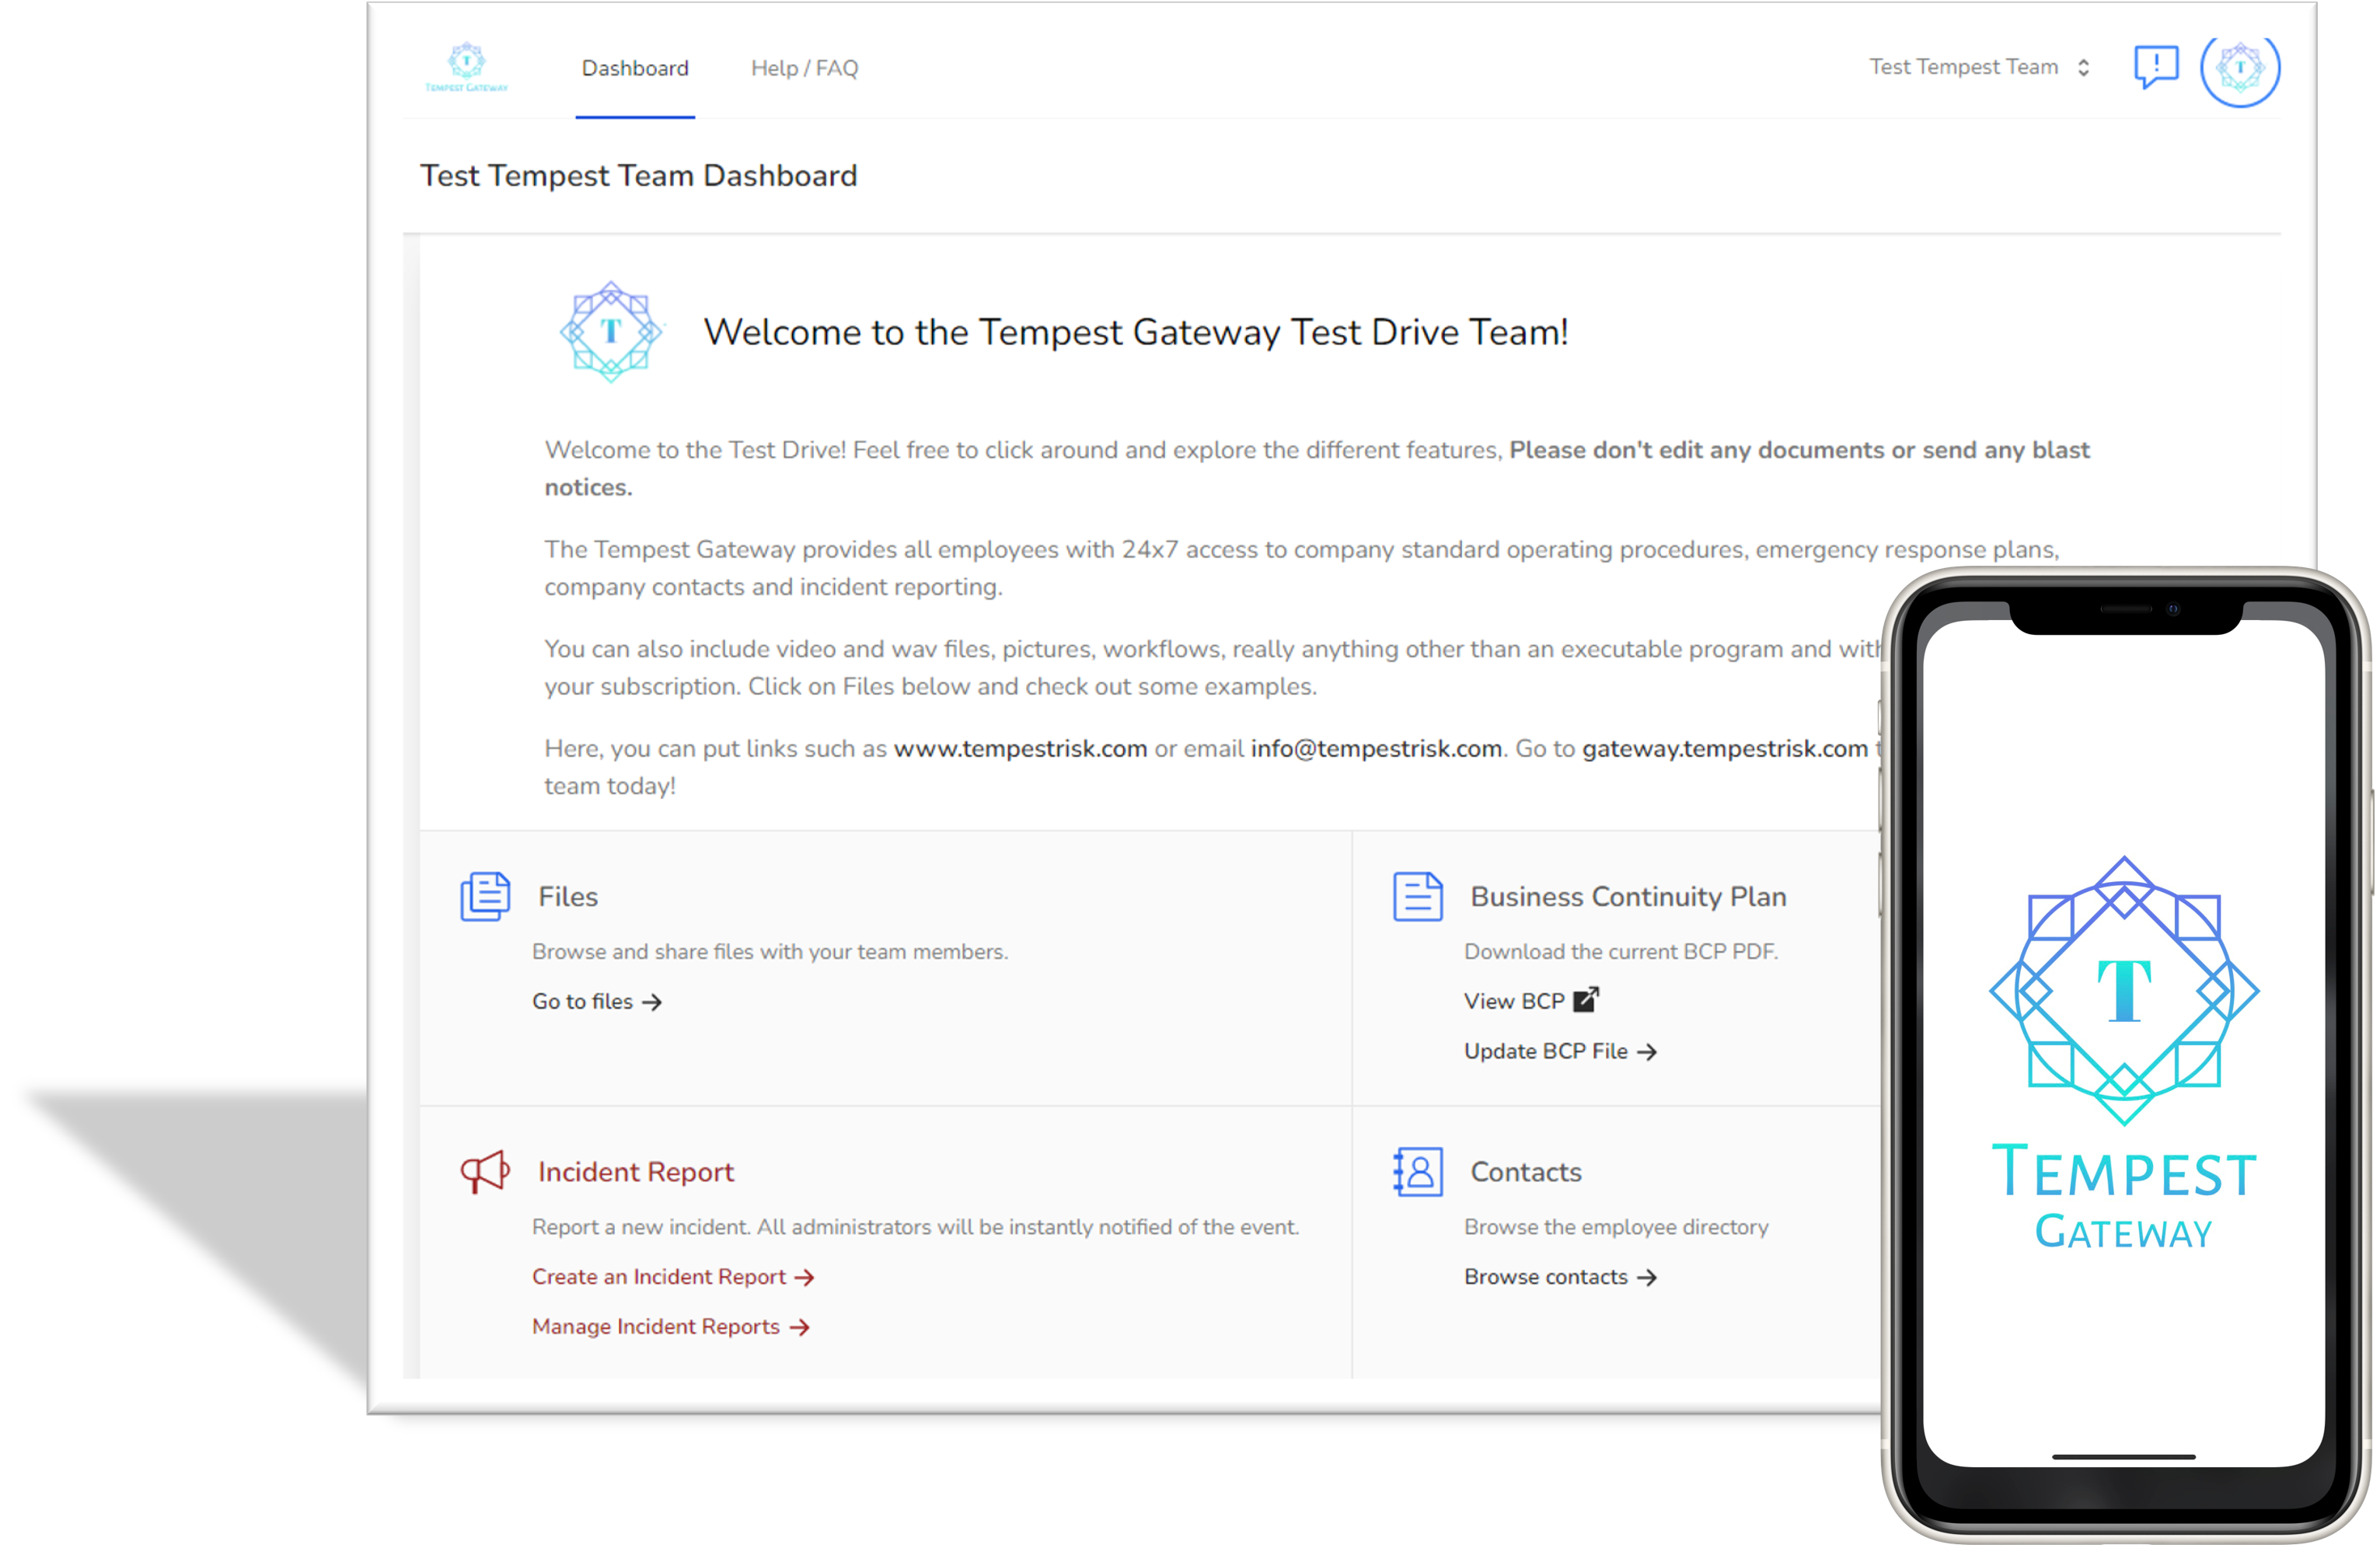 Tempest Gateway web and mobile apps. Register at gateway.tempestrisk.com to access all of the features or contact us with questions.